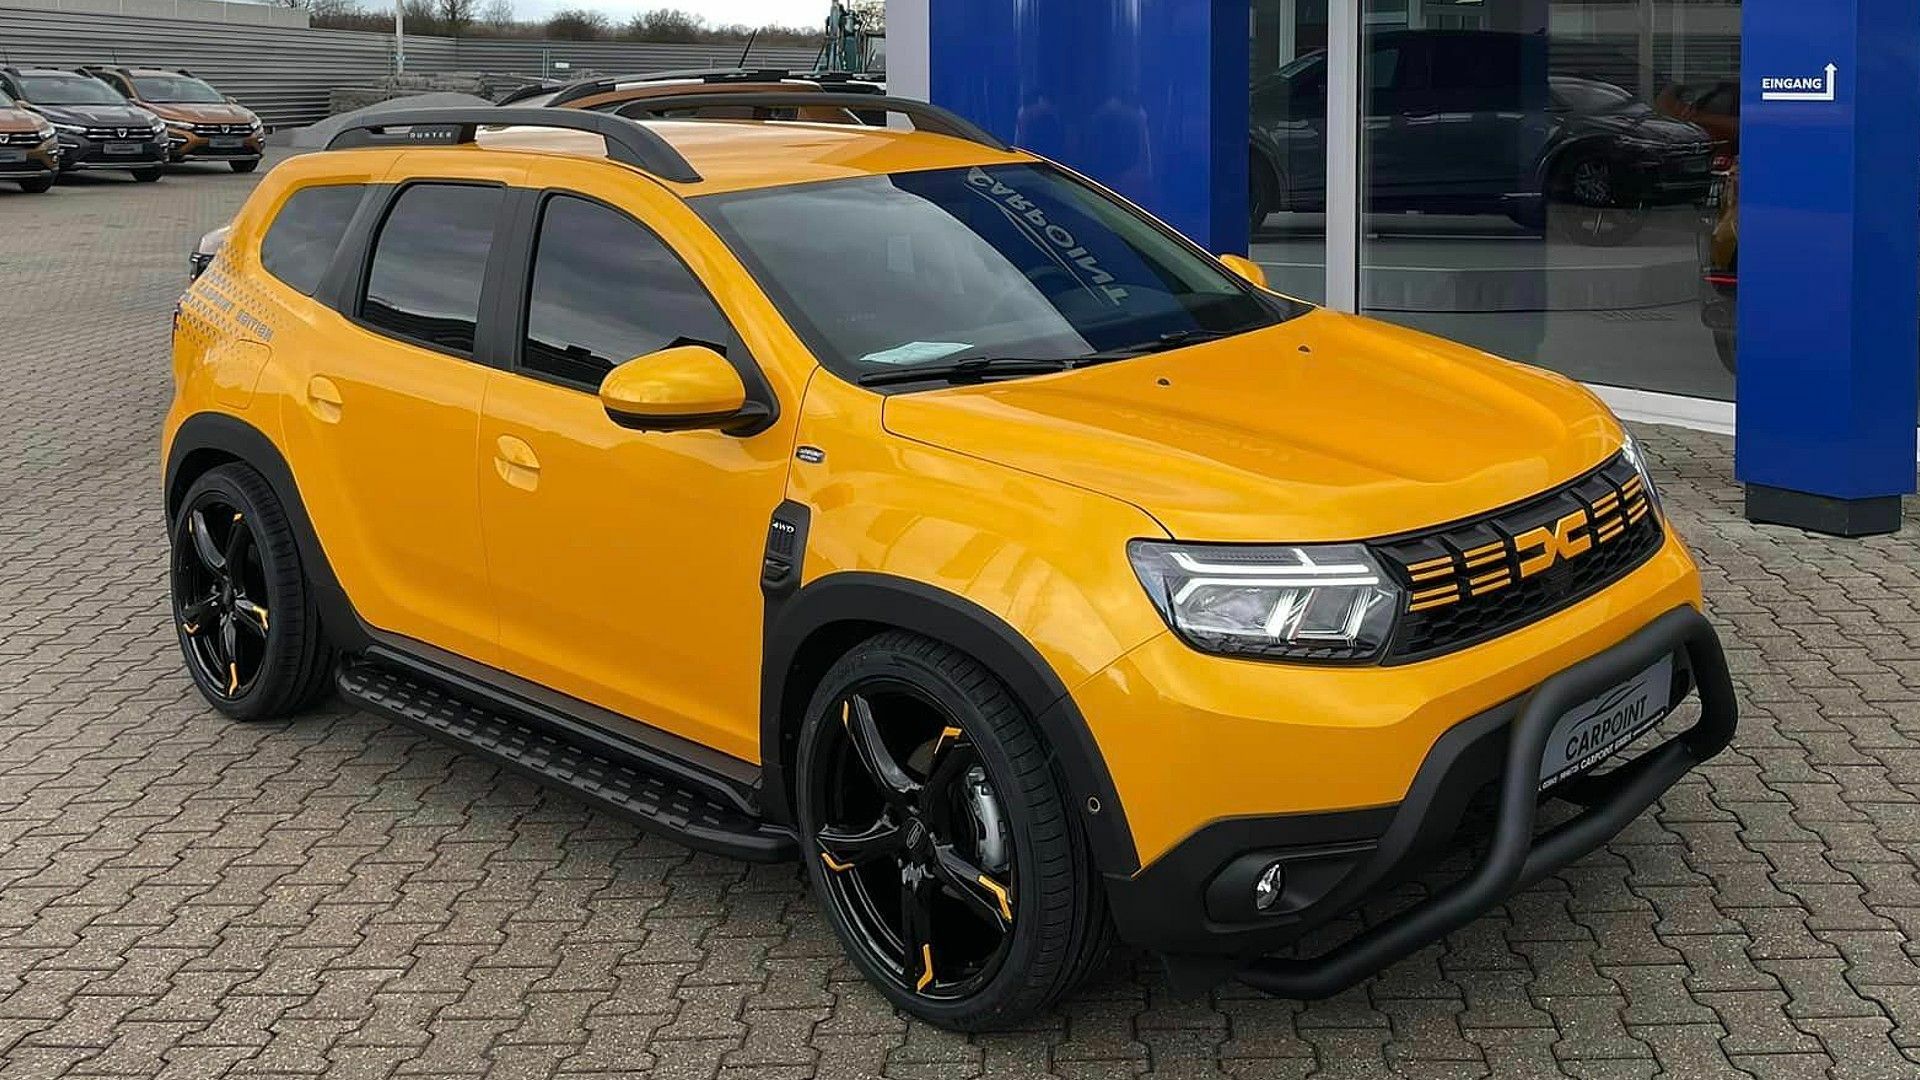 efectivo vocal justa Dacia Duster Gets A Low-Ride Sporty Makeover With CarPoint Yellow Edition |  Carscoops